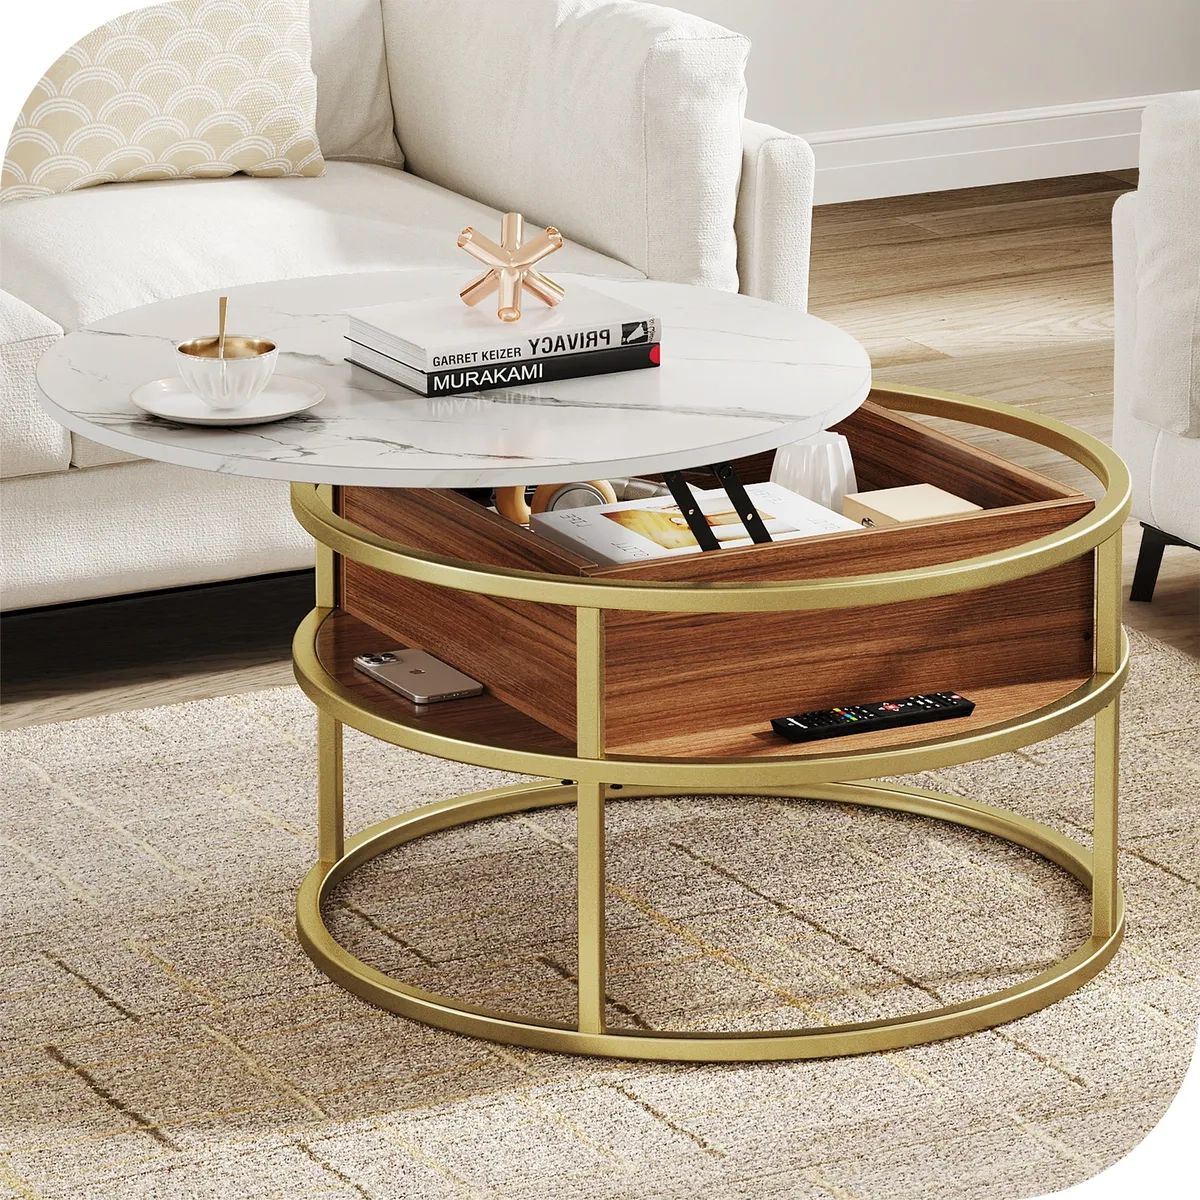 Modern Coffee Table Round Lift Top With Hidden Compartment Wooden Center  Table | Ebay Pertaining To Modern Coffee Tables With Hidden Storage Compartments (View 7 of 15)